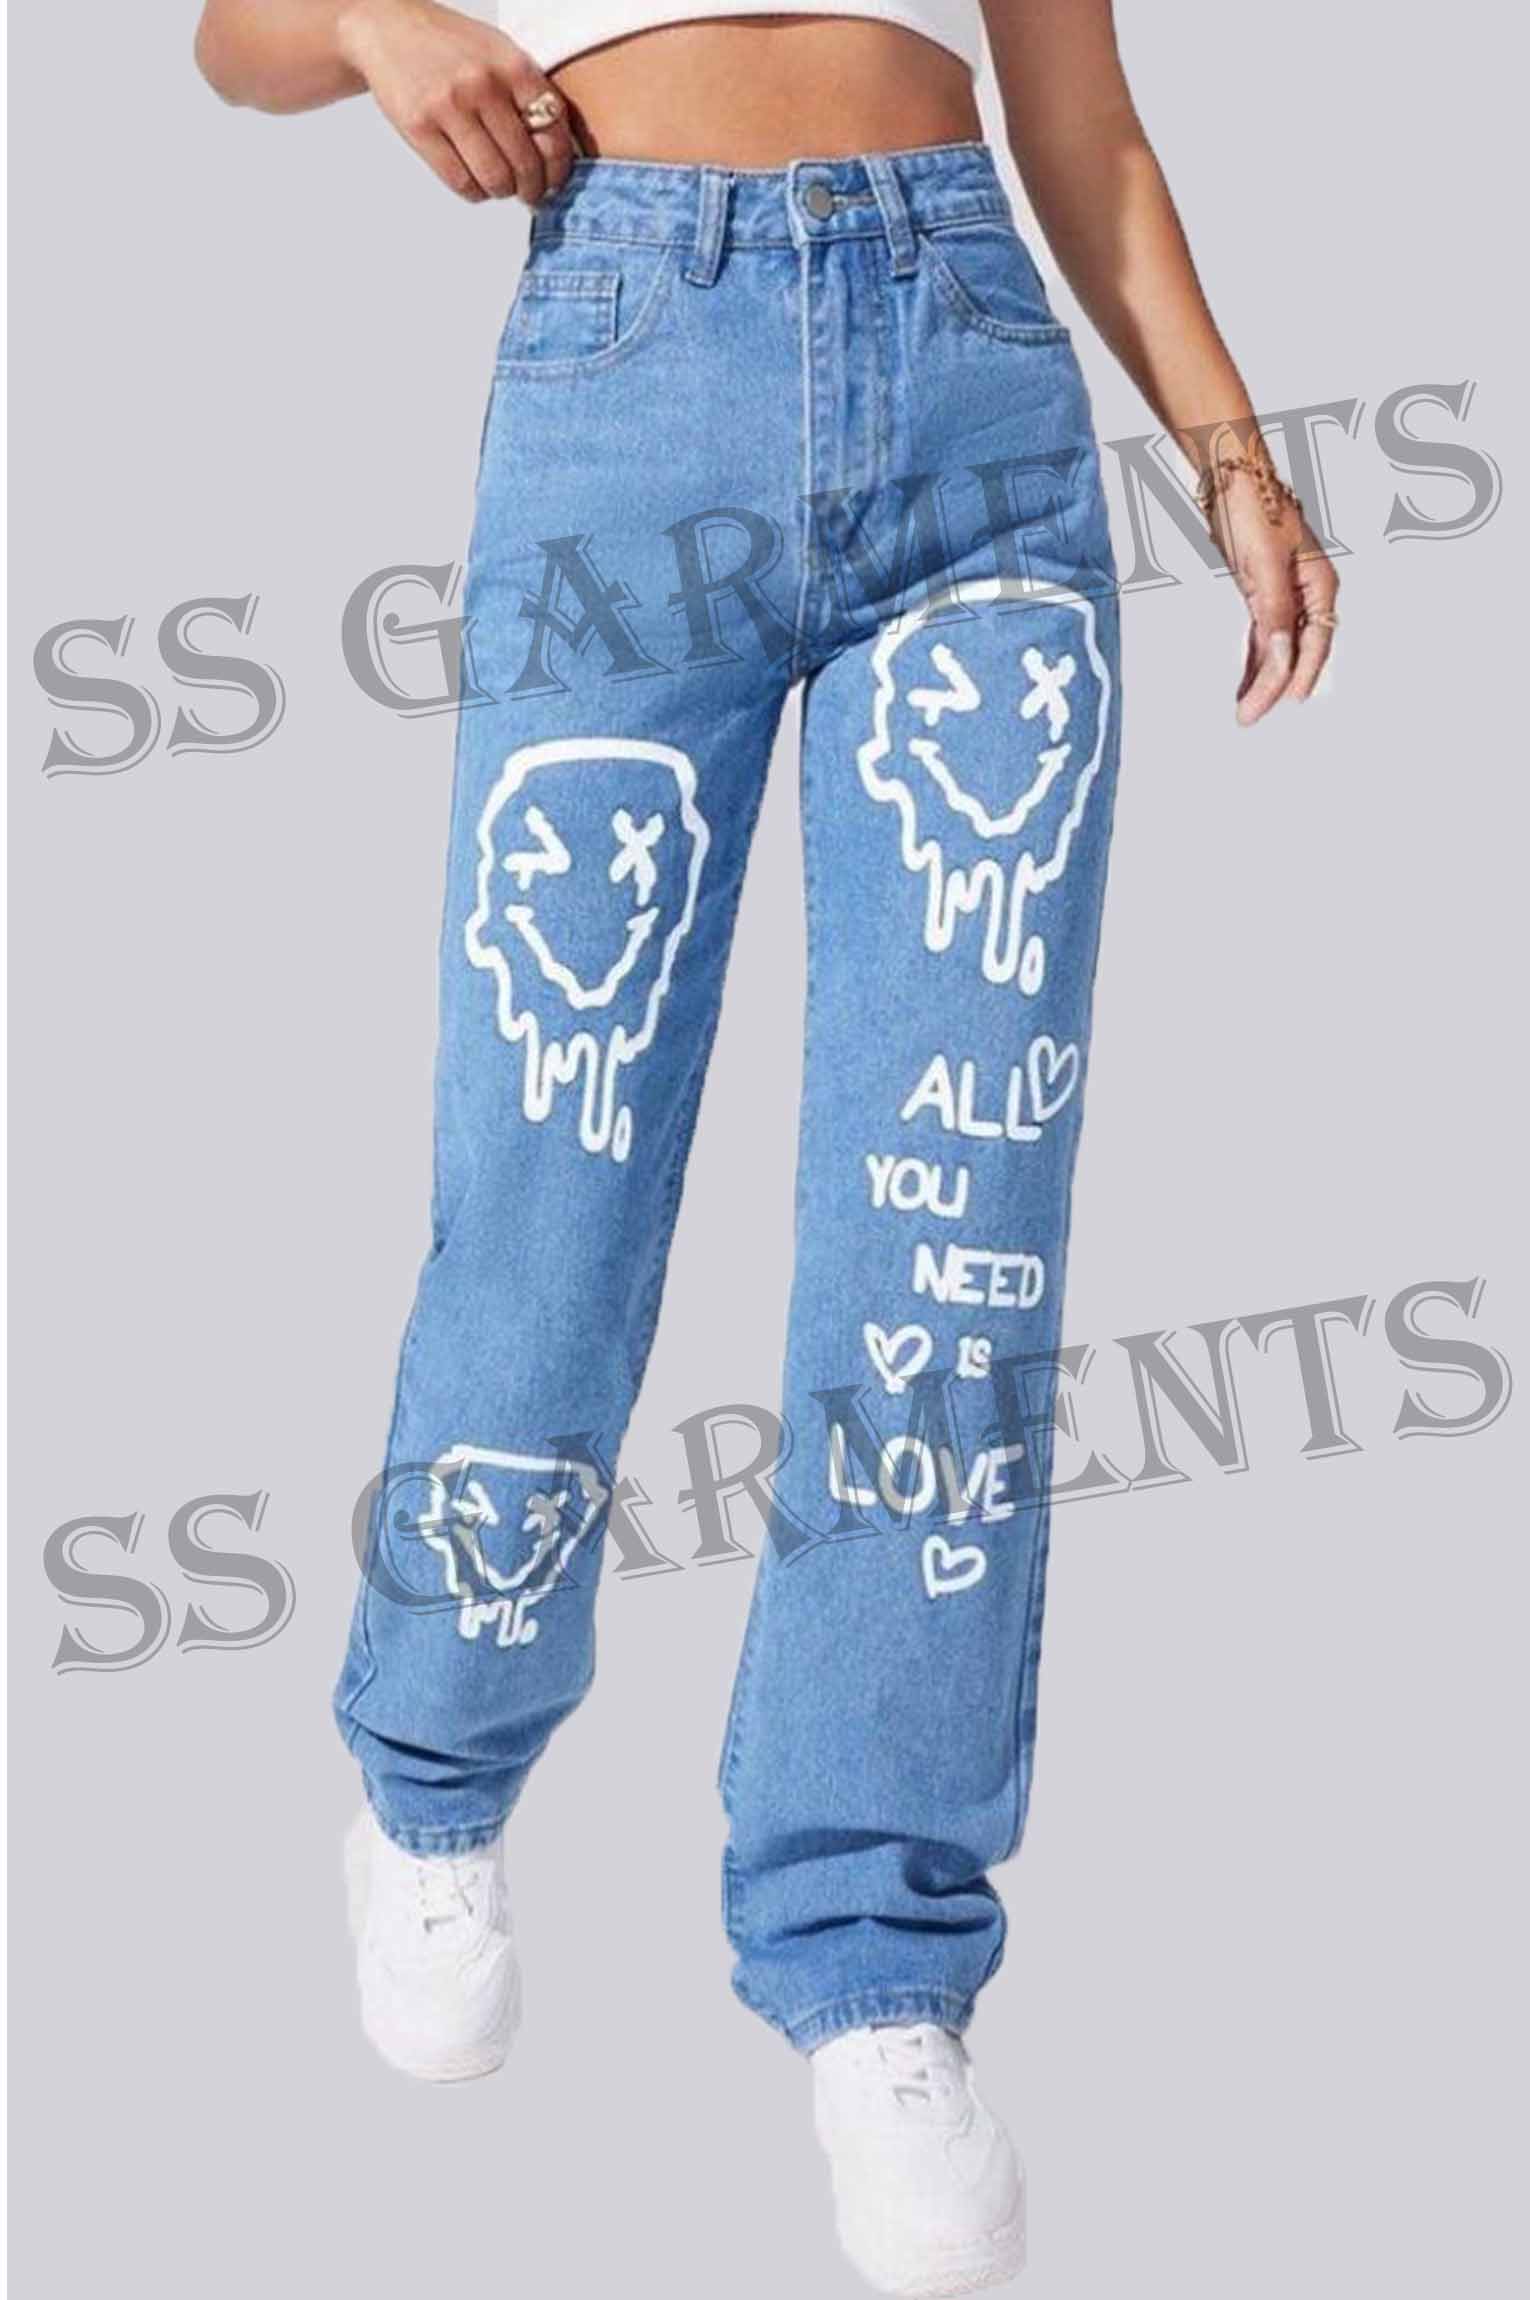 All You Need is Love Printed Denim Jeans with Cotton and Nylon Soft Fabric